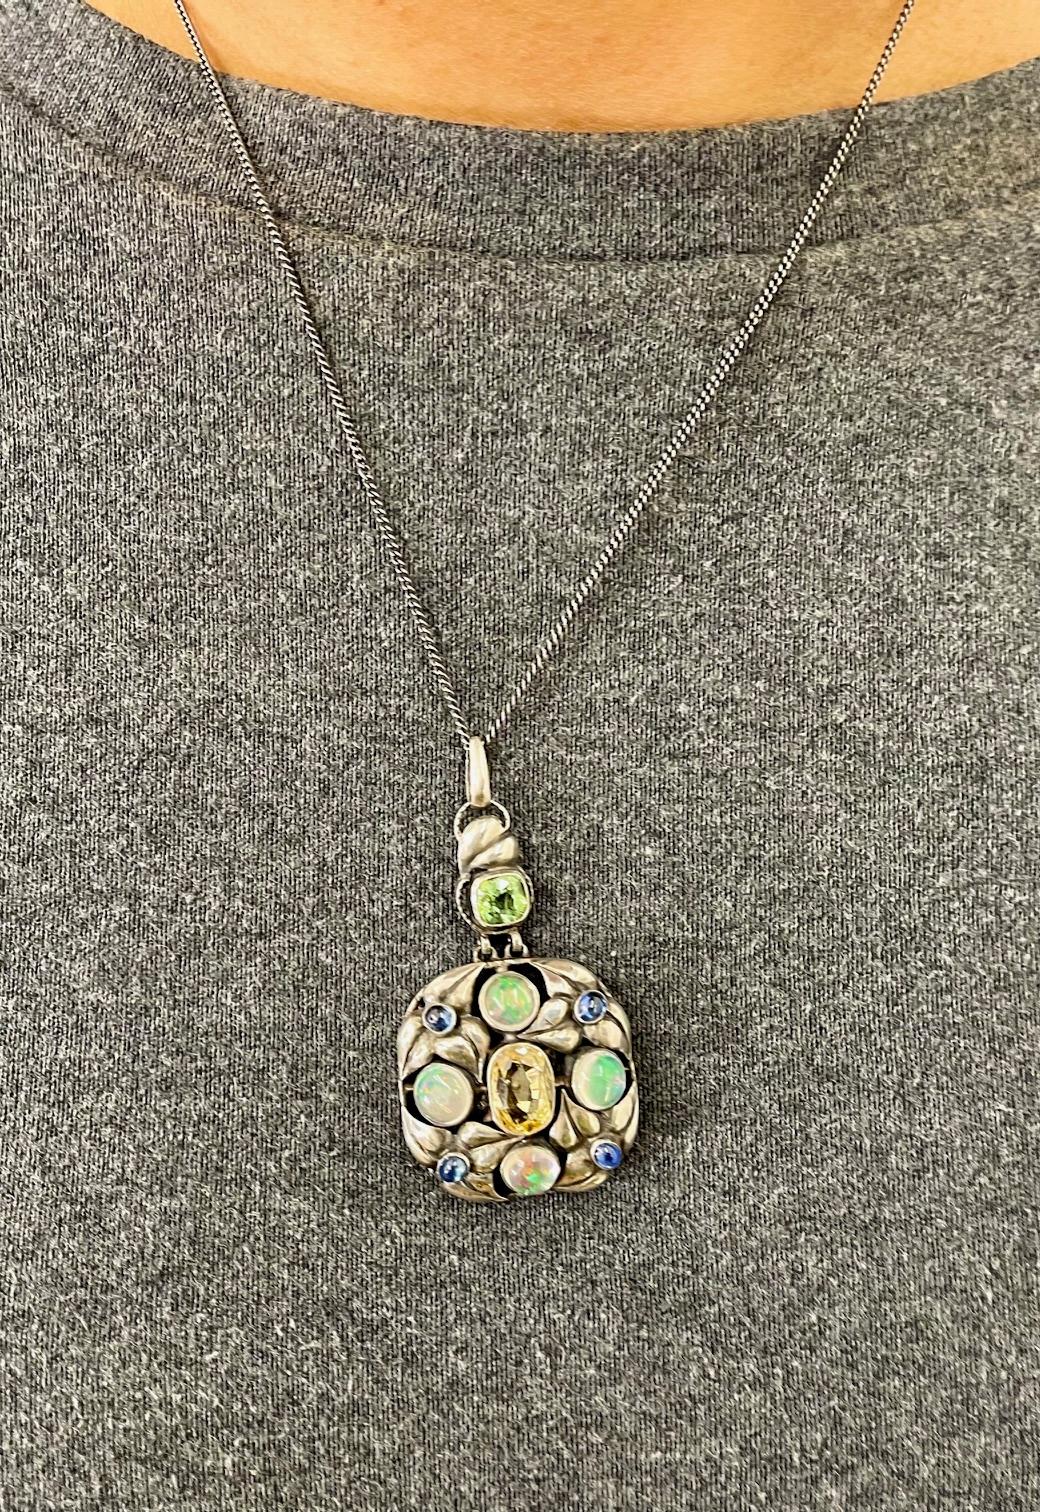 Simply Beautiful!  Rare Vintage Edwardian Multi Gem Sterling Silver Oscar worthy Pendant Necklace. Embellished with Hand set Sapphire and Citrine Gemstones in finely Hand crafted beaded openwork frame. Open-back. Suspended from a 15.75